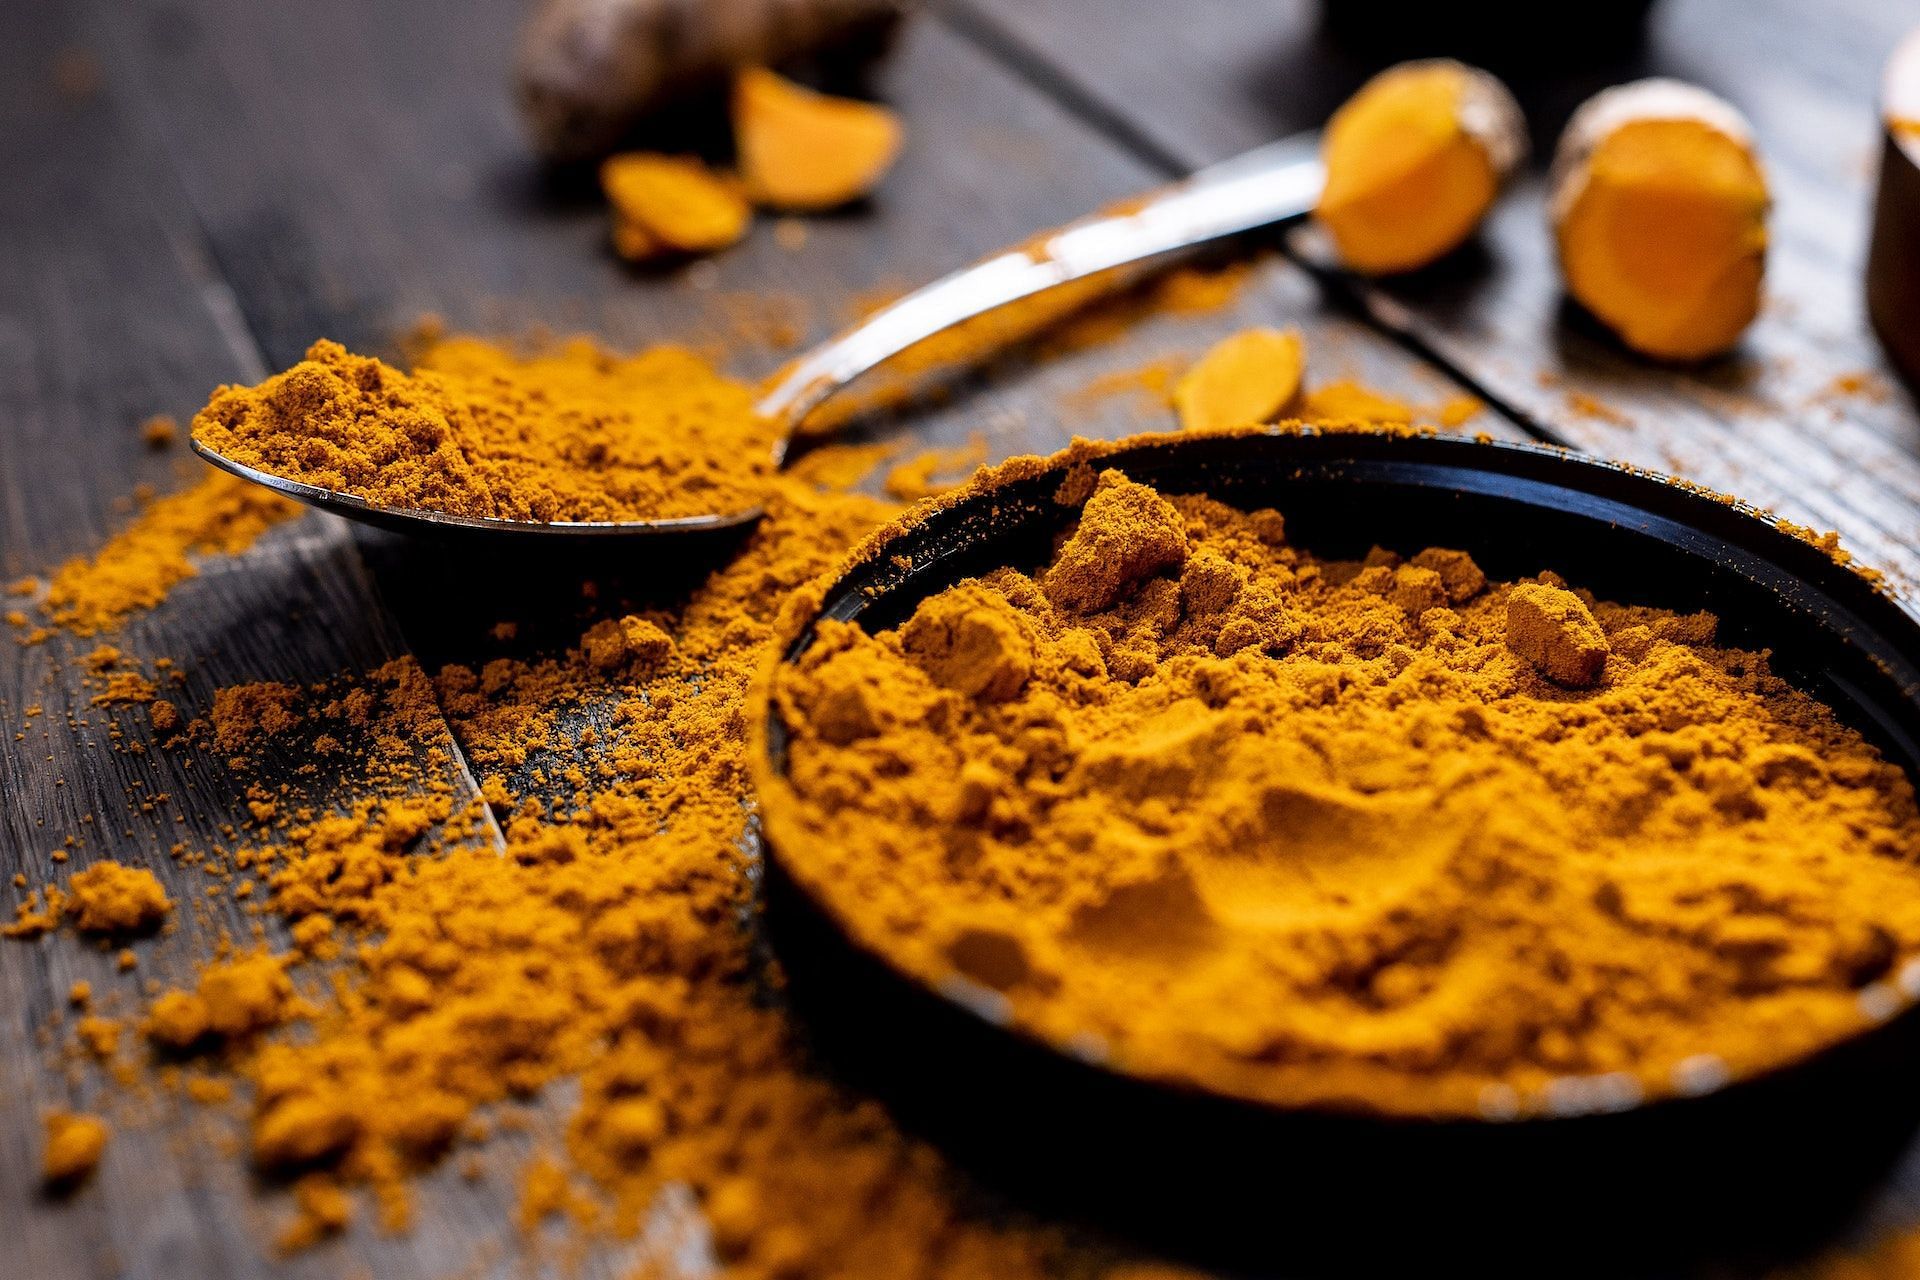 How to heal cuts fast? Apply turmeric for a faster recovery. (Photo via Pexels/Karl Solano)